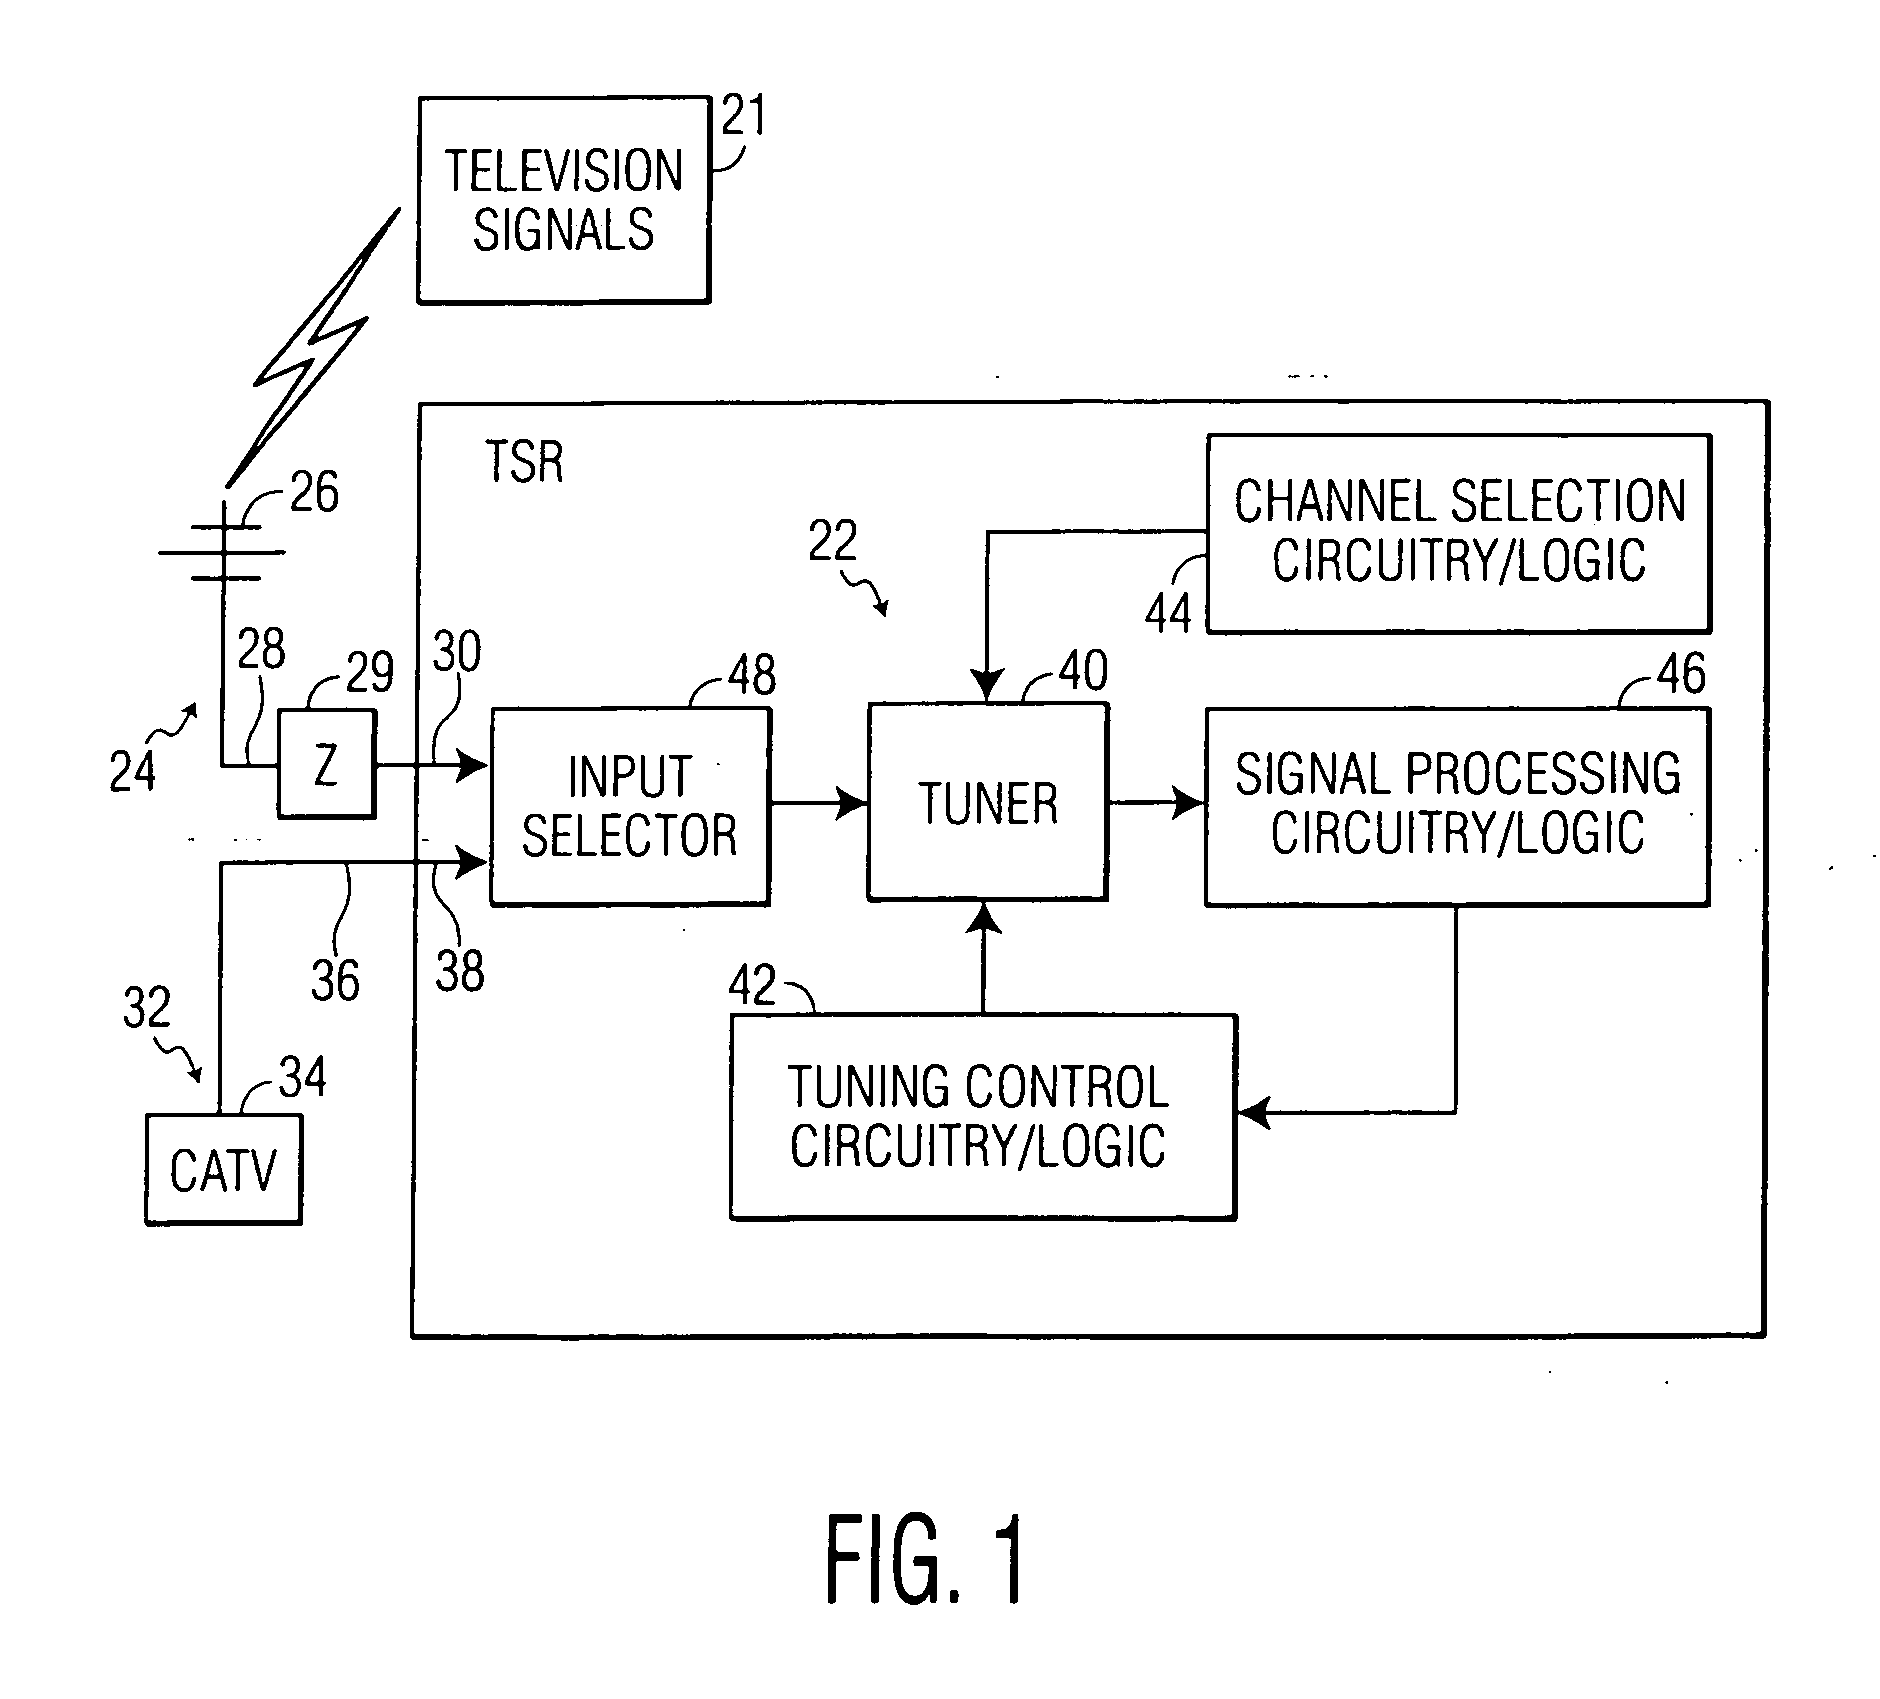 Tuner input filter with electronically adjustable response for adapting to antenna characteristic